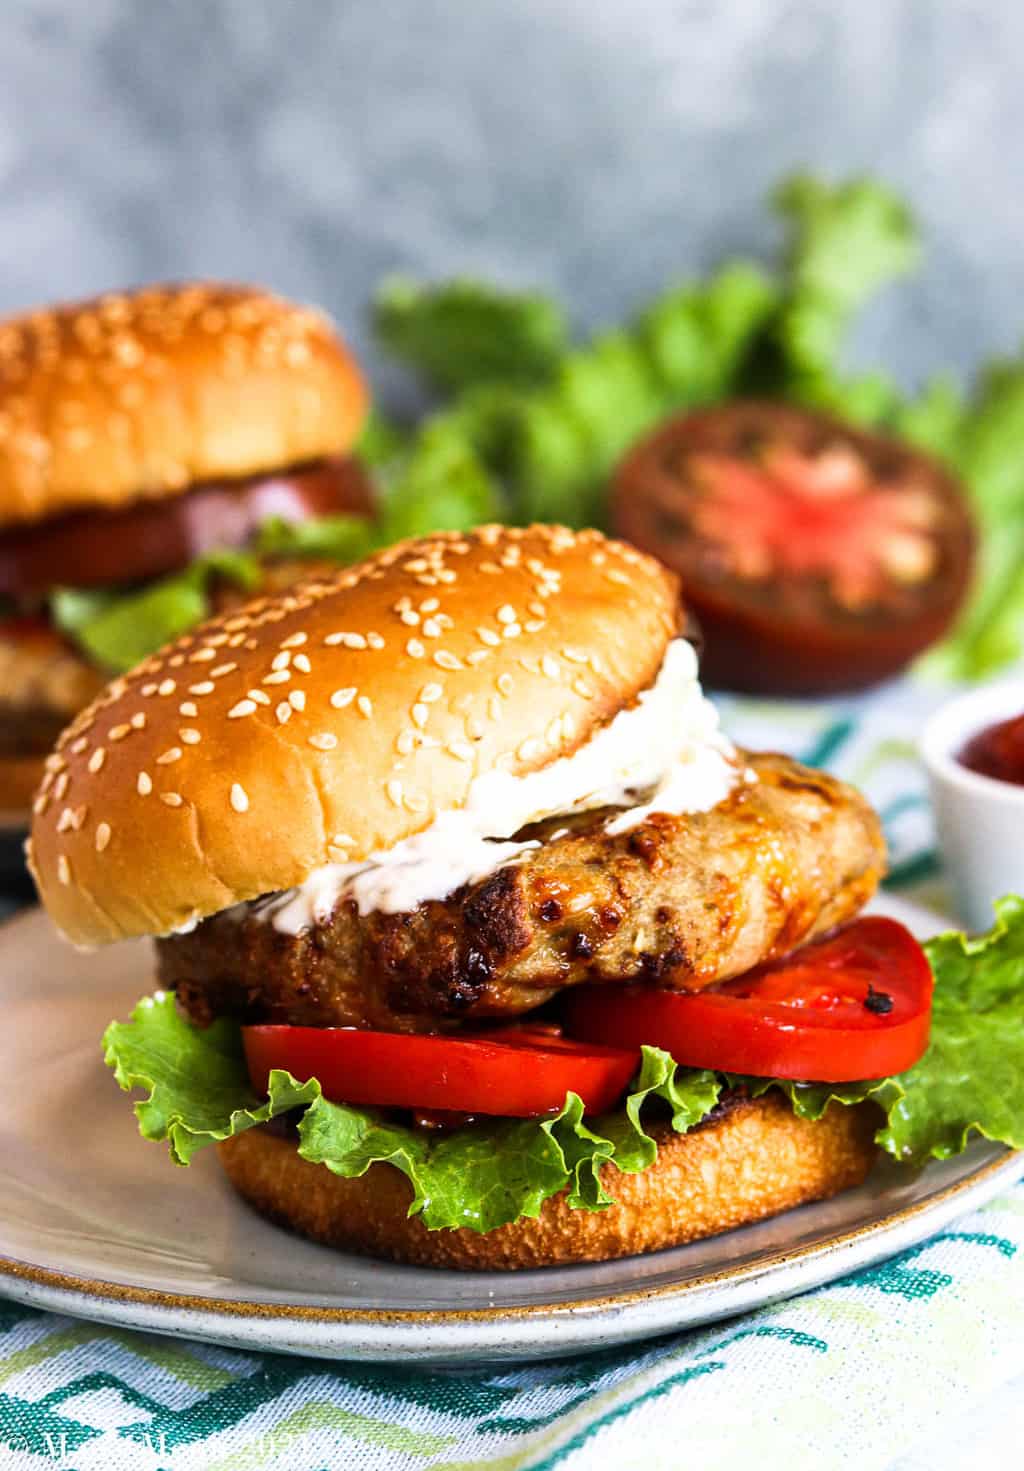 An up-close side shot of an air fryer turkey burger on a plate with another burger on the background